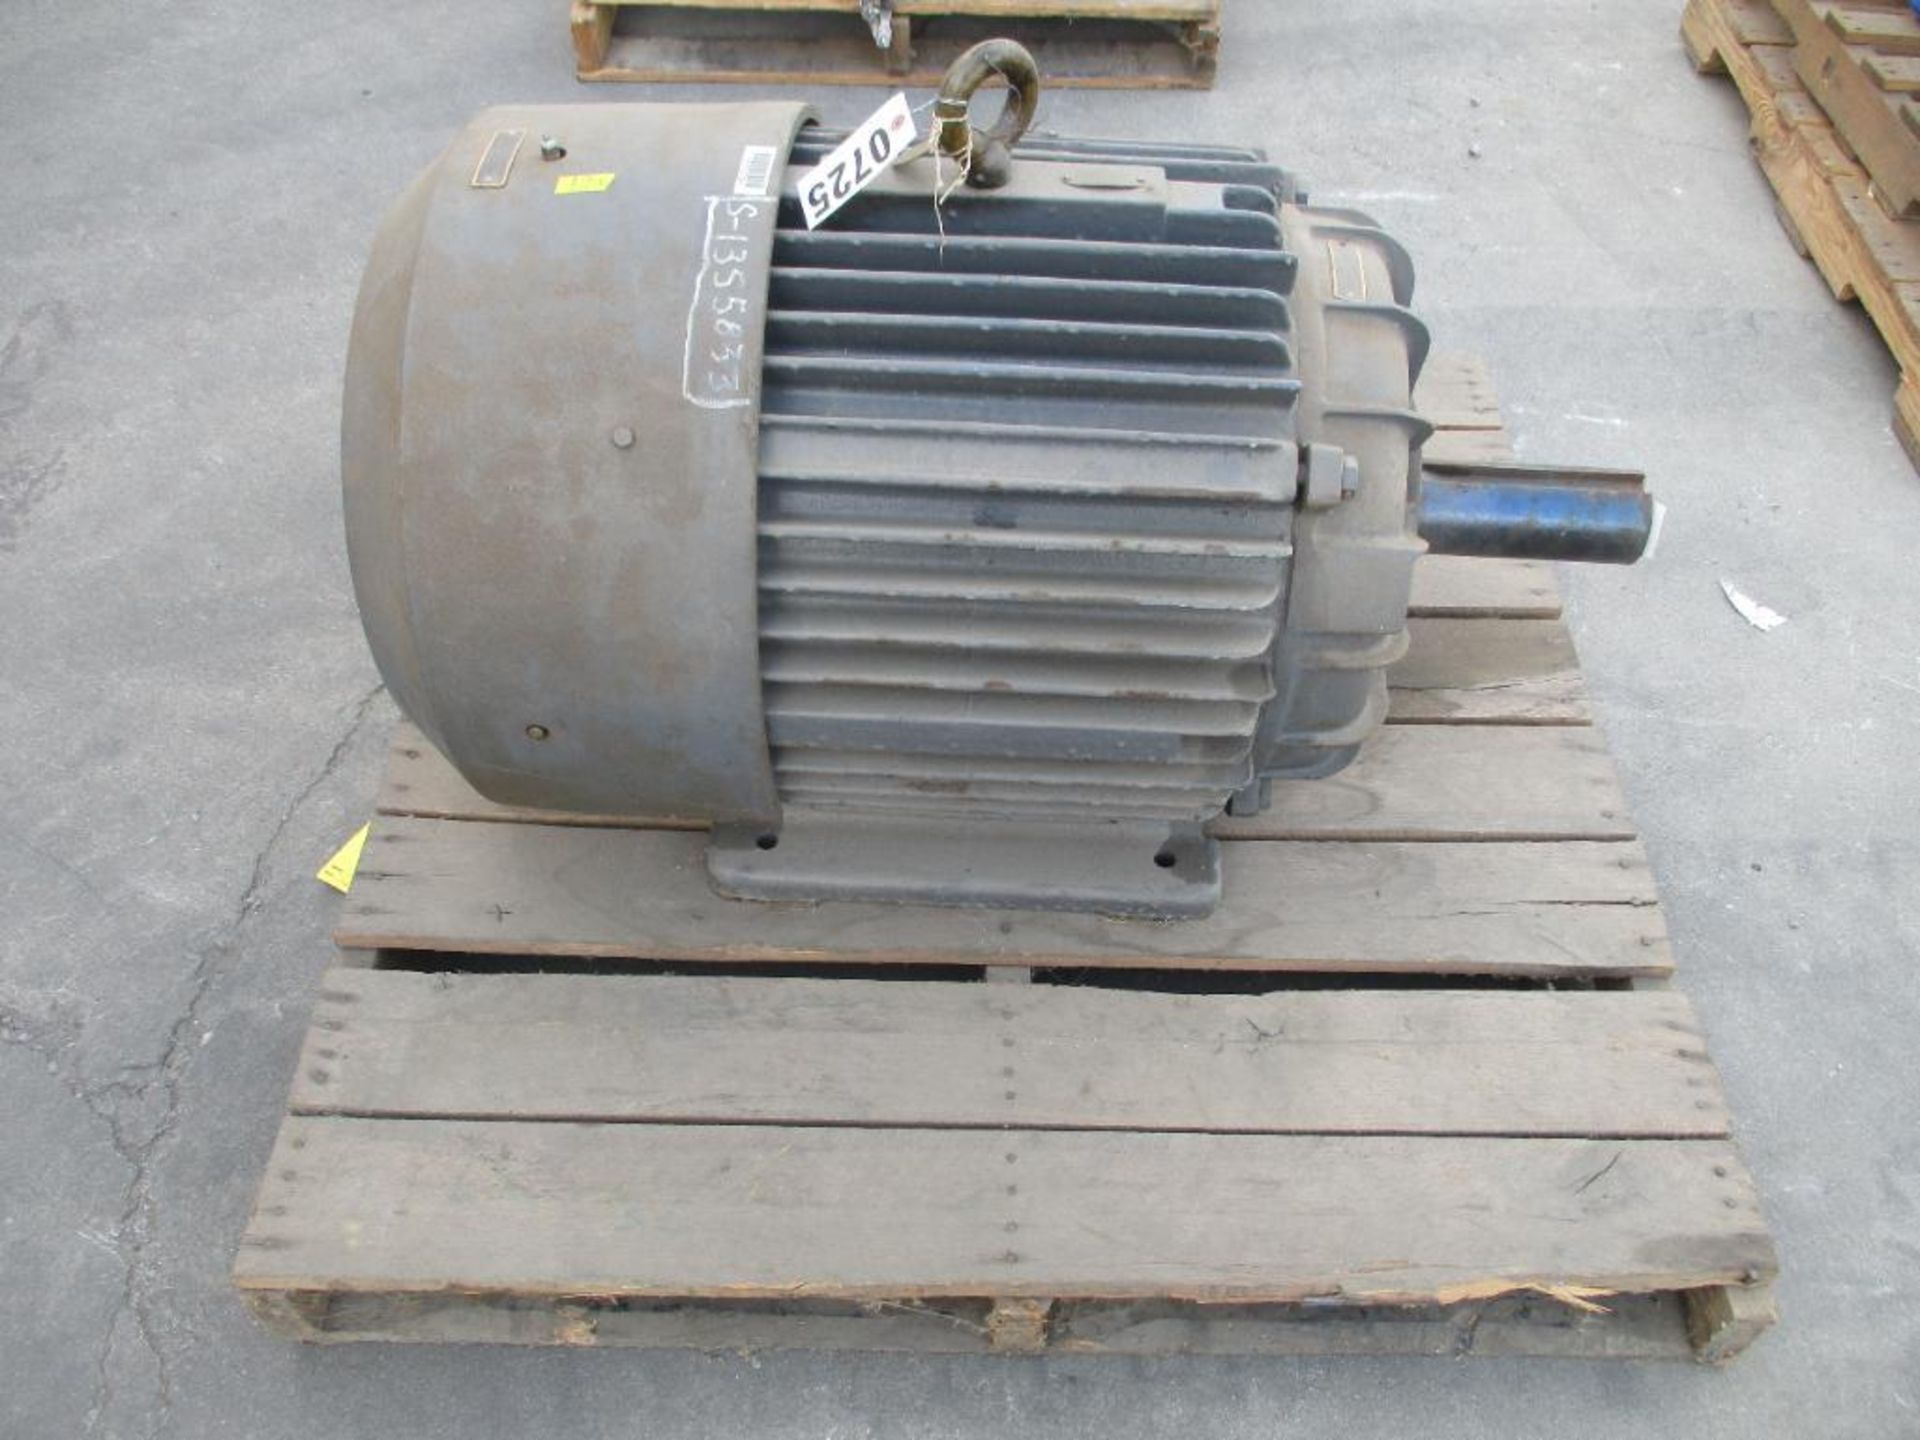 MAGNETEK 3 PHASE 125HP 1780RPM 444T FRAME A/C MOTOR P/N N/A 1754# LBS (THIS LOT IS FOB KNOXVILLE TN) - Image 3 of 5